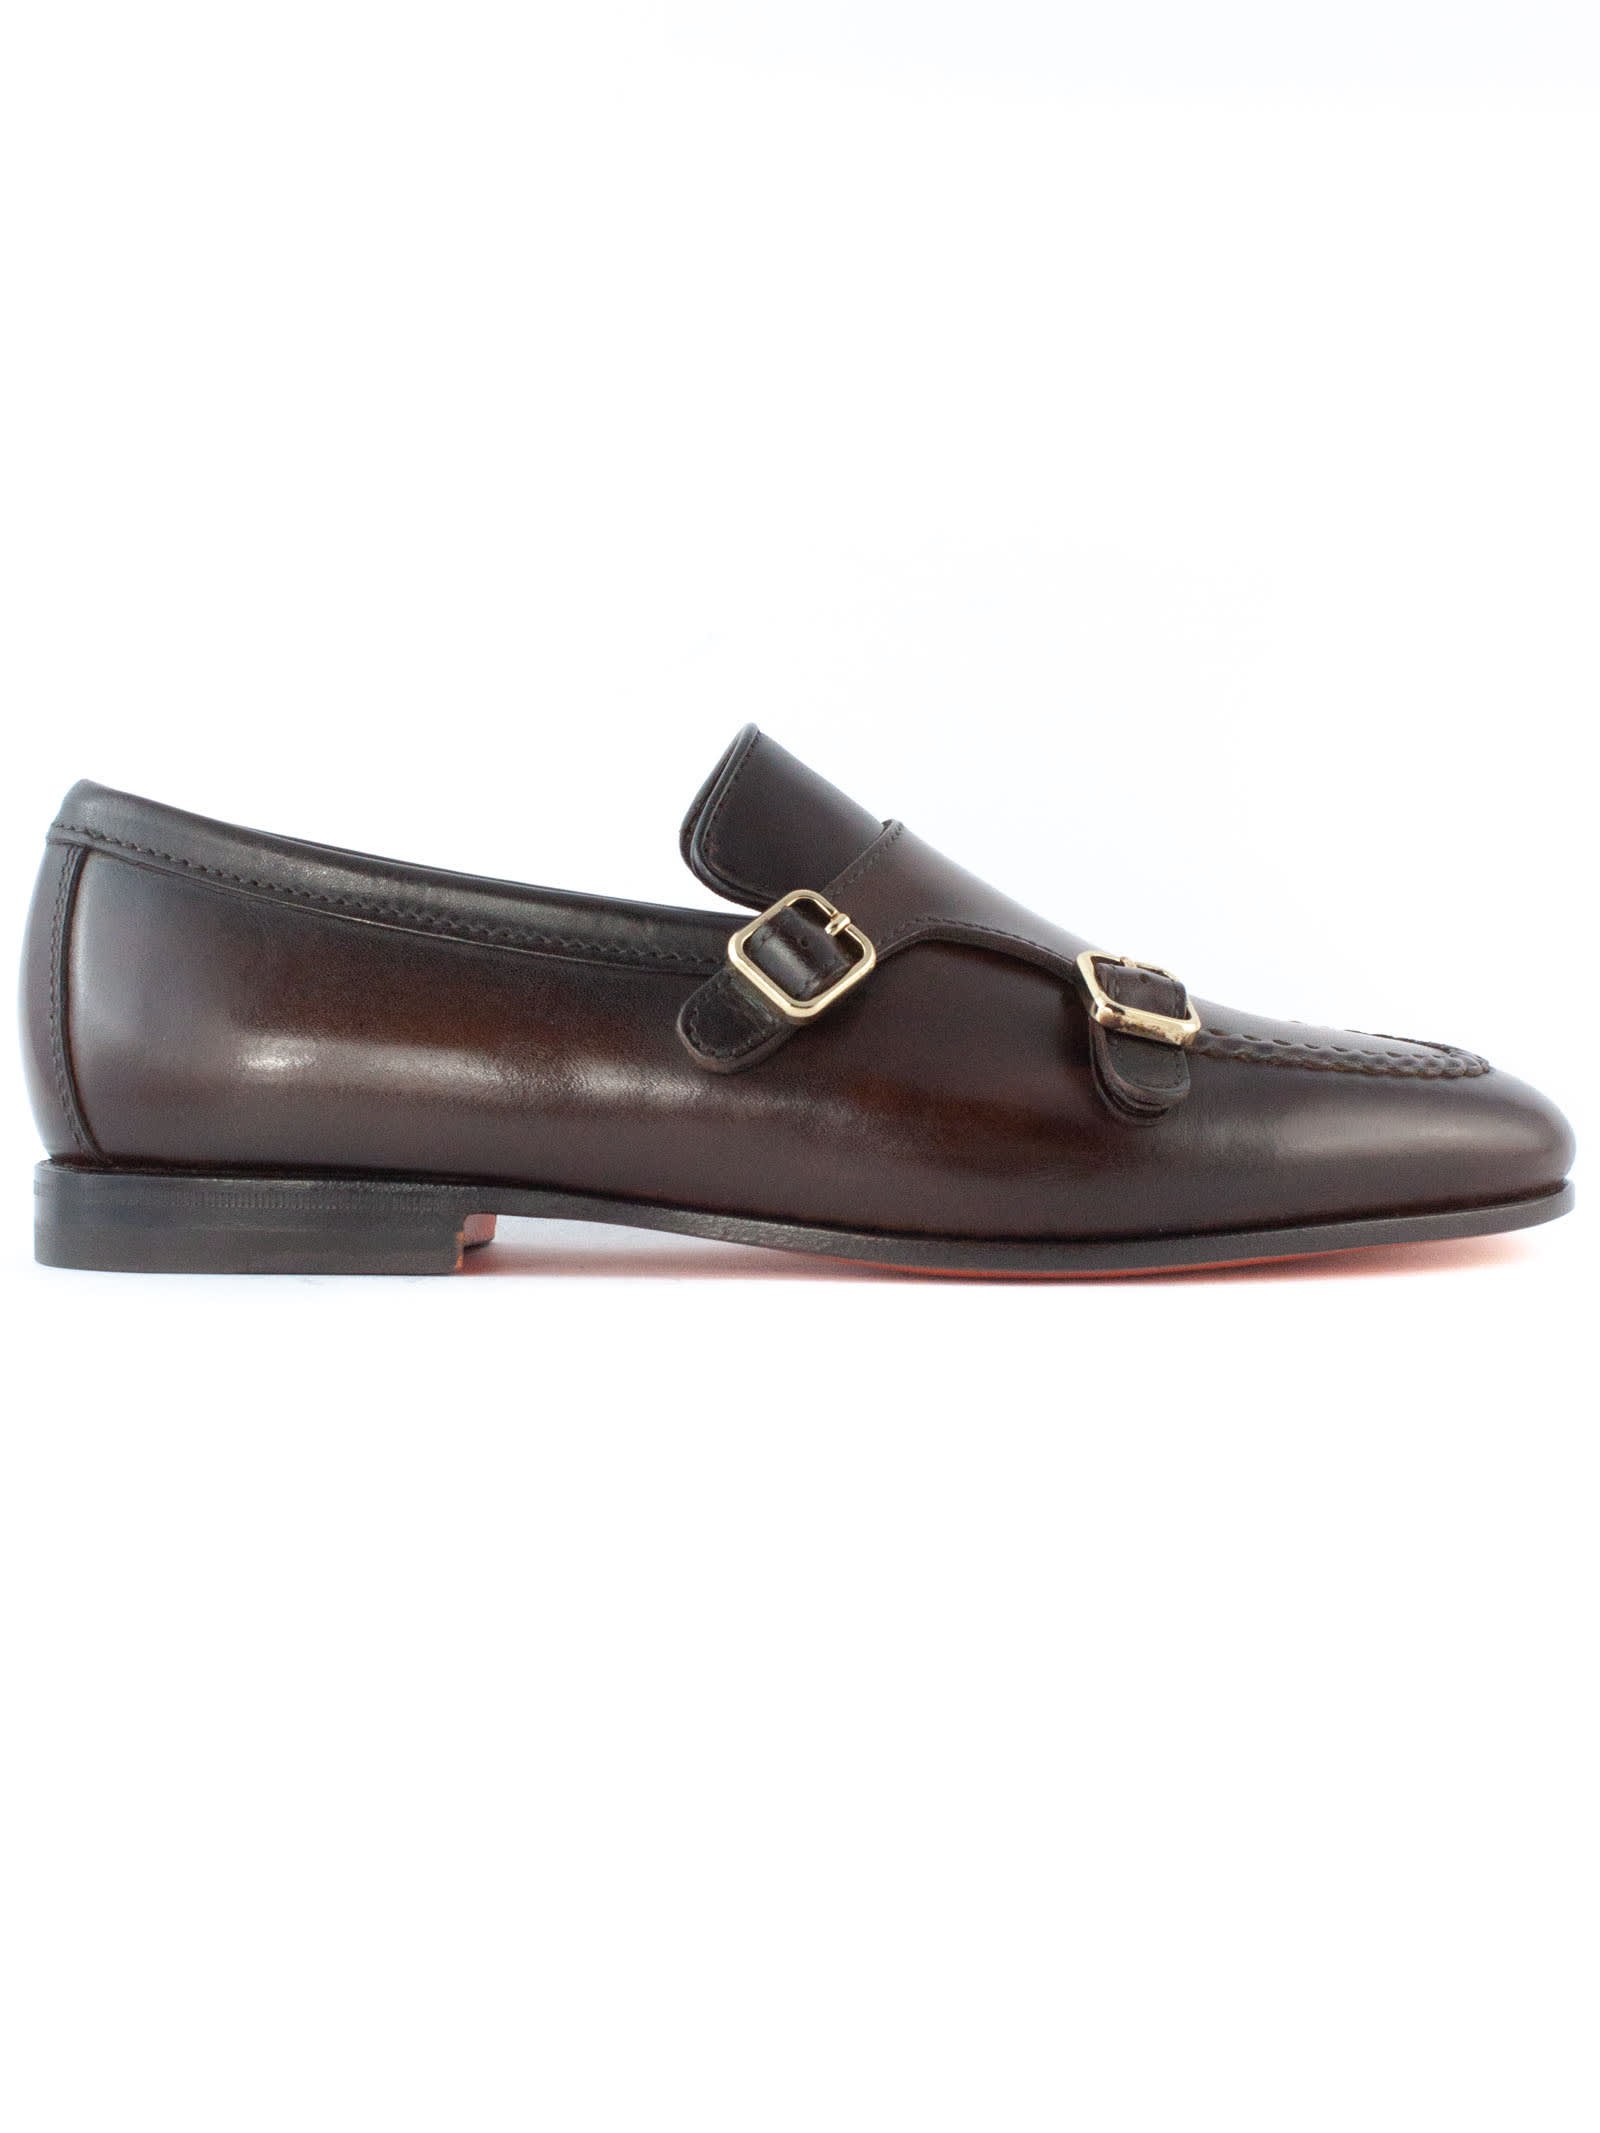 Brown Leather Double-buckle Loafer